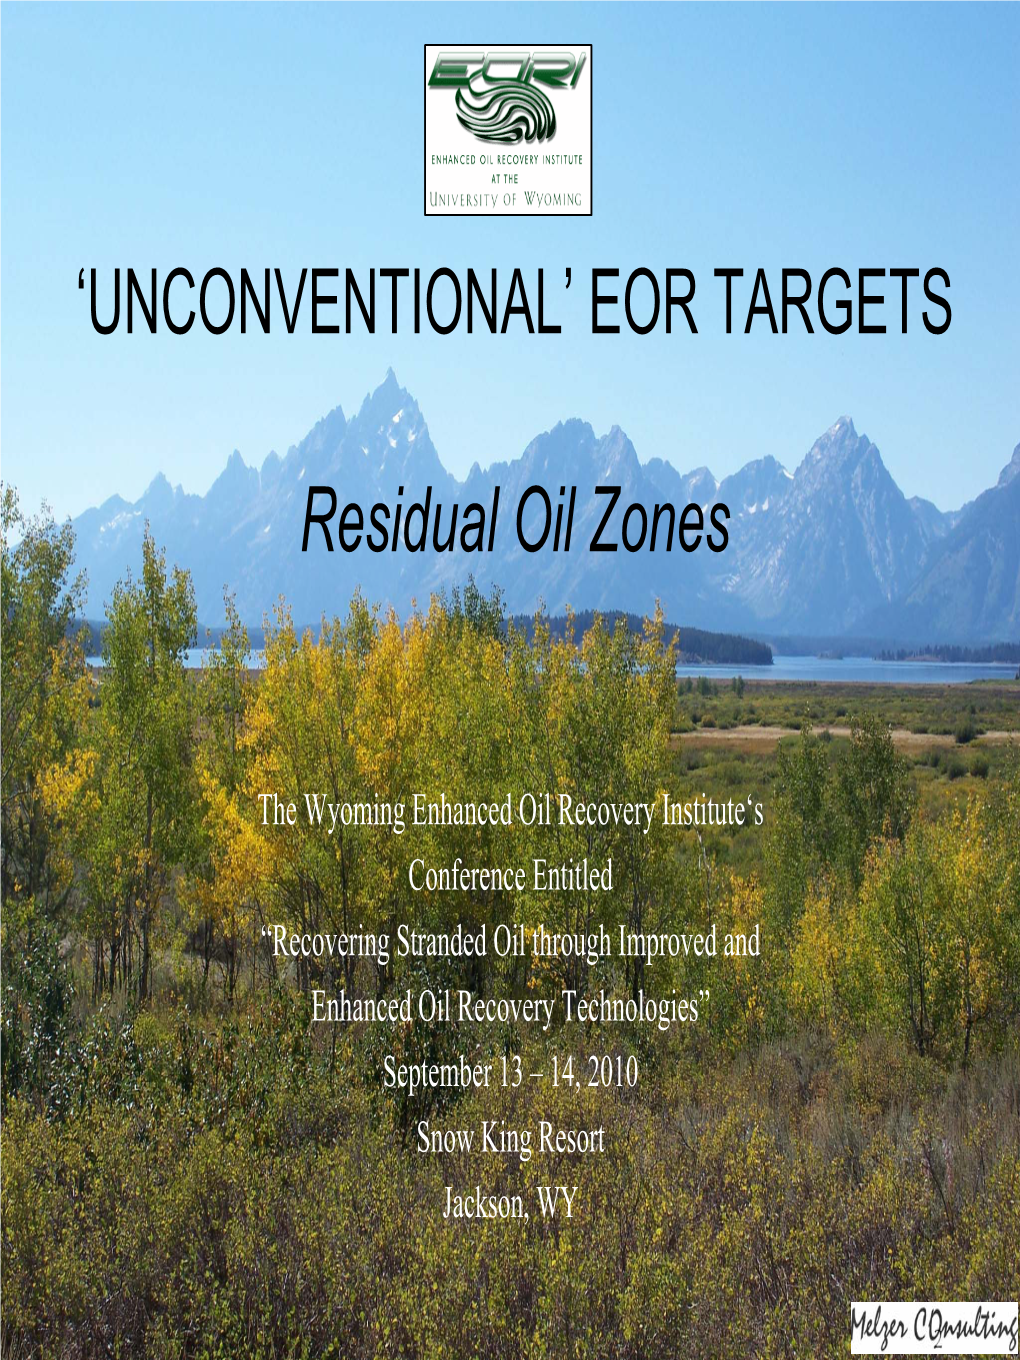 Origin of Residual Oil Zones and Emergent Commercial Exploitation